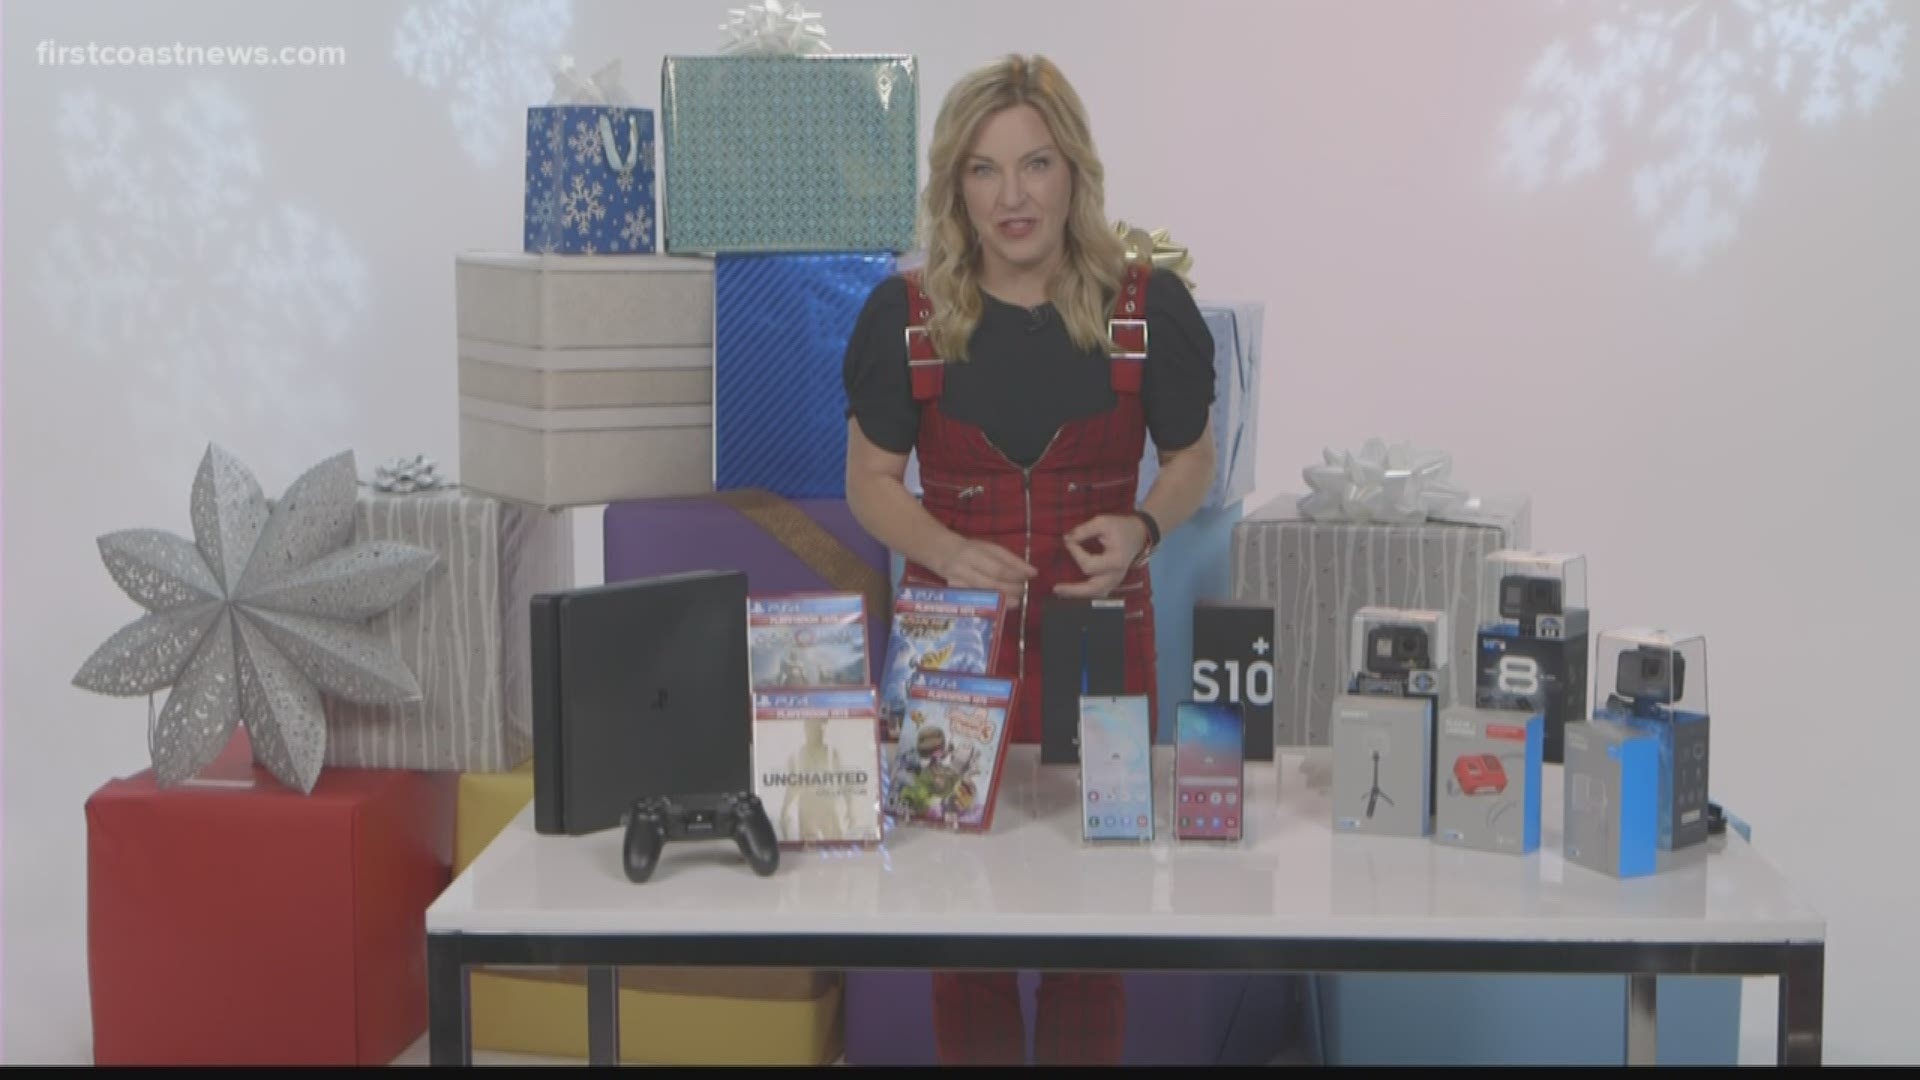 Tech expert Jennifer Jolly shares her list of the hottest gadgets to get your hands on this season.